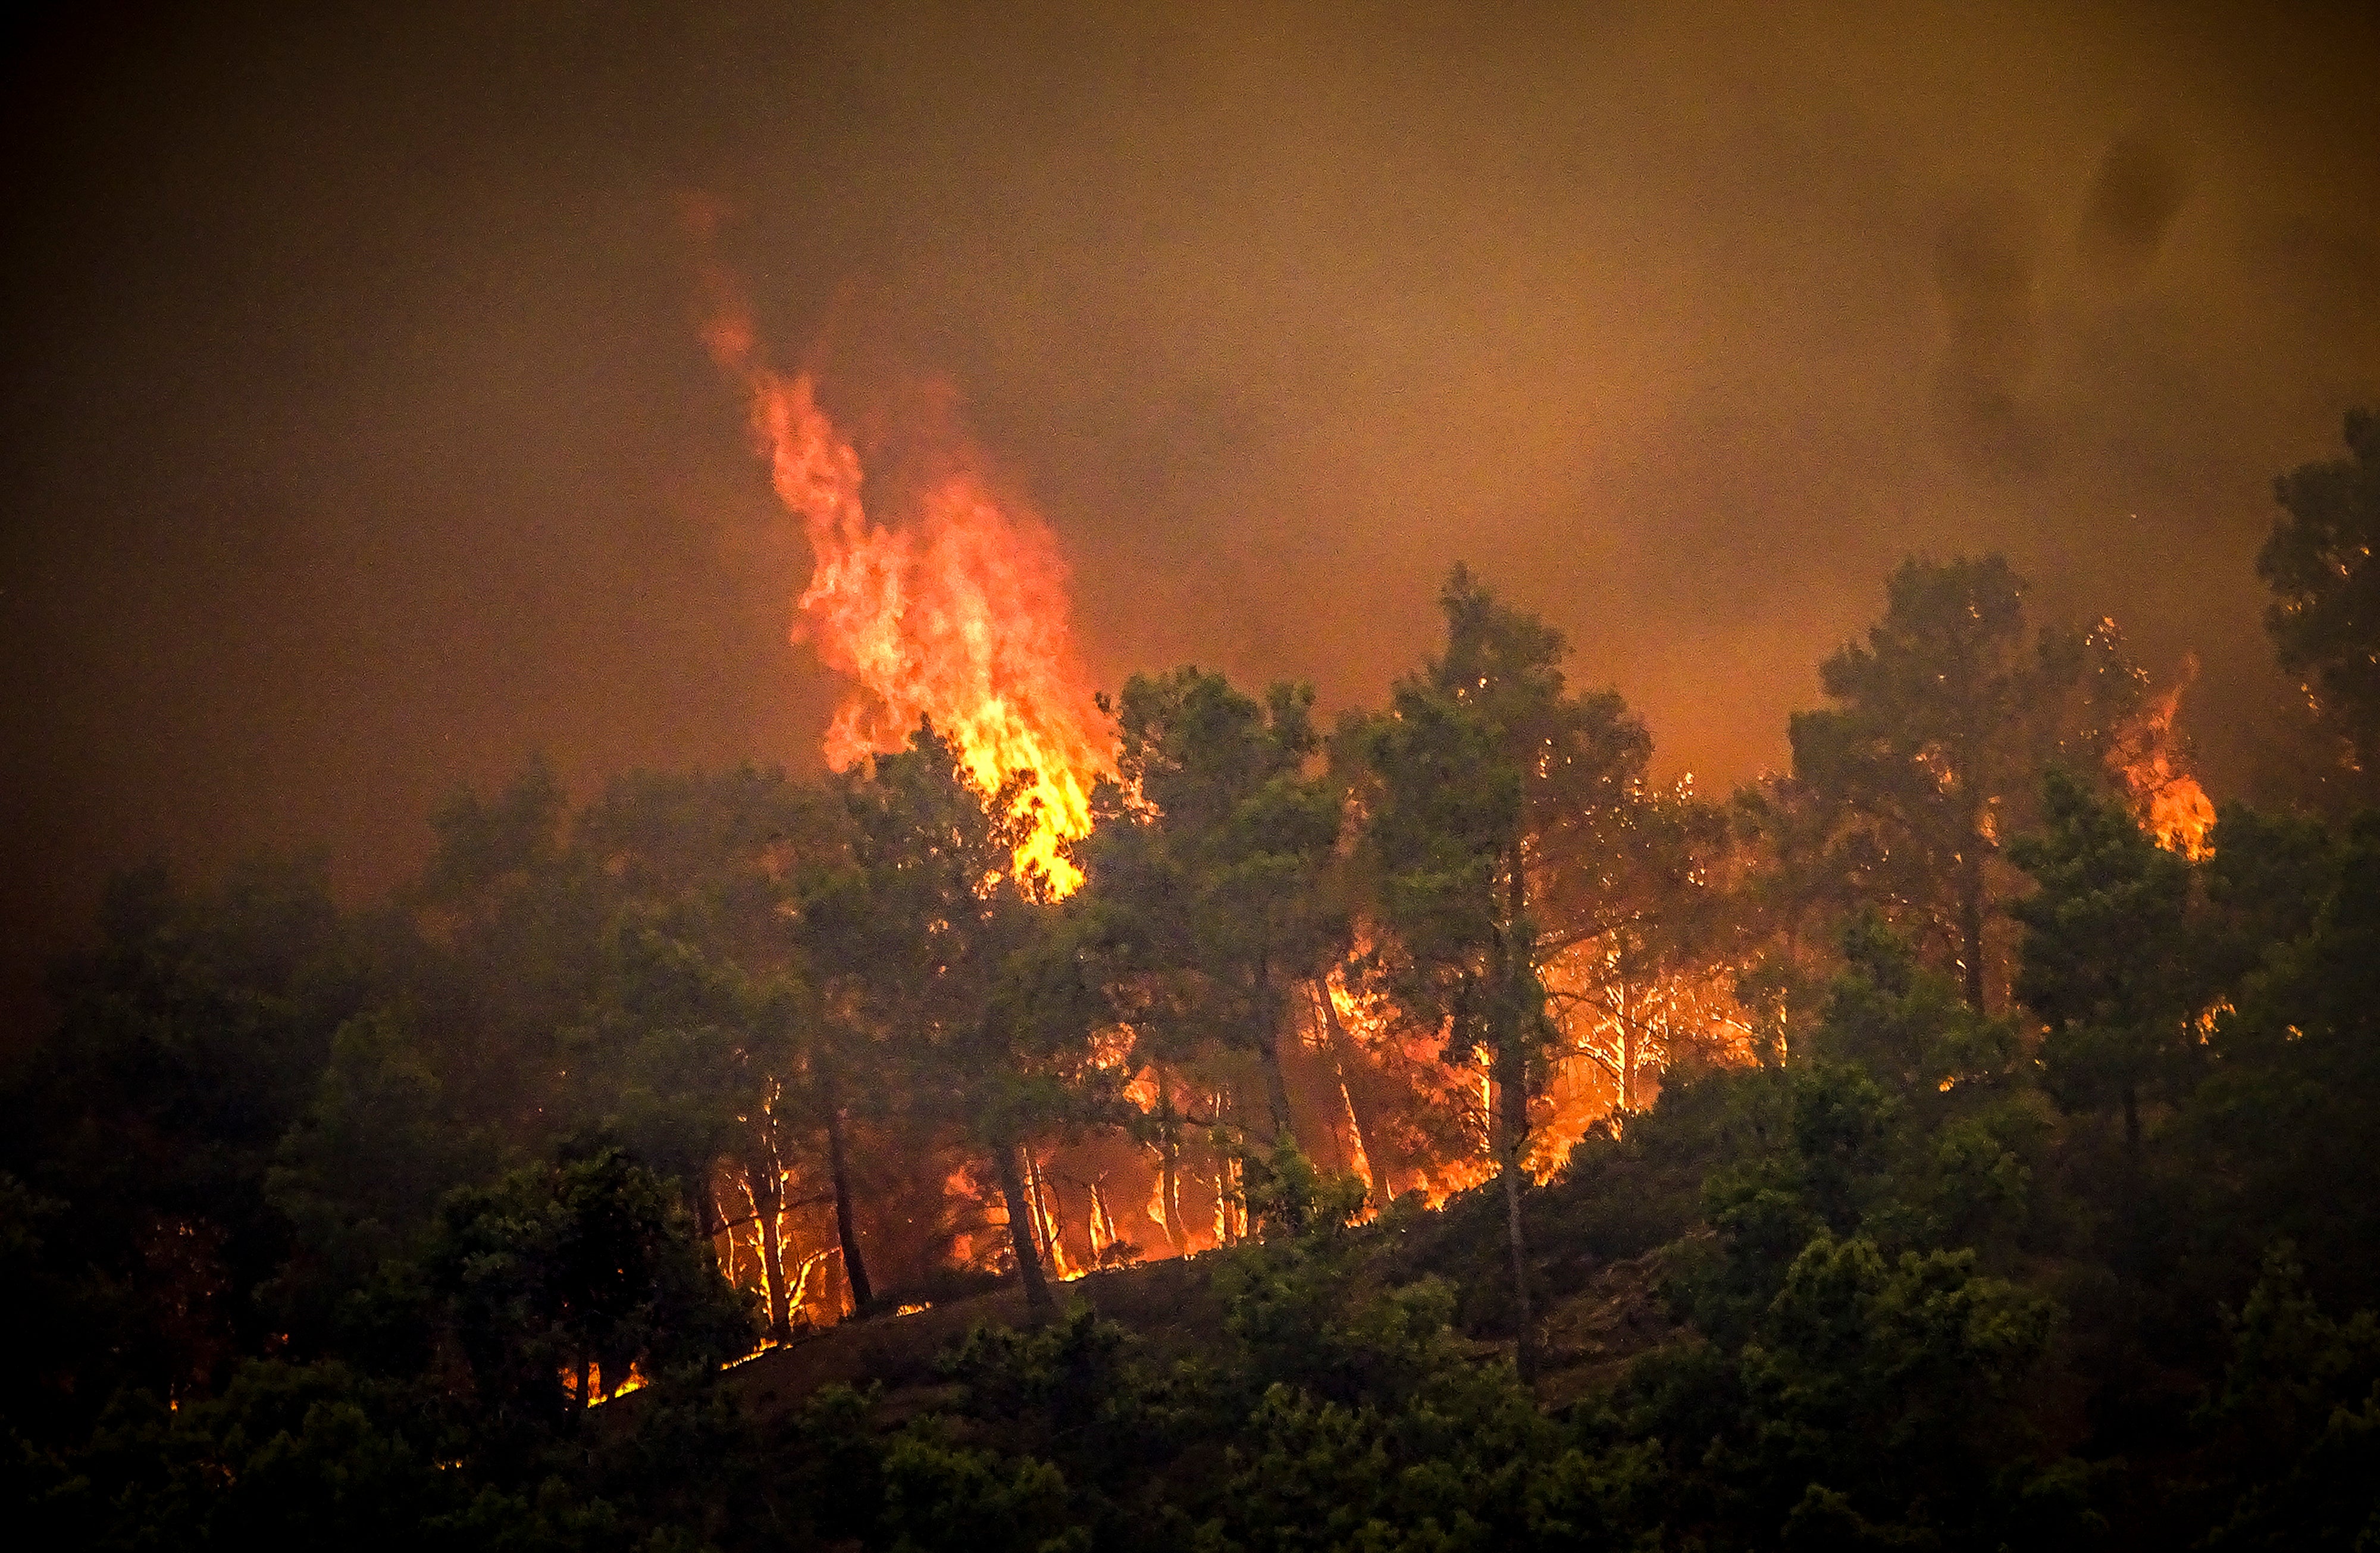 Flames rise during a forest fire on the island of Rhodes on Saturday 22 July